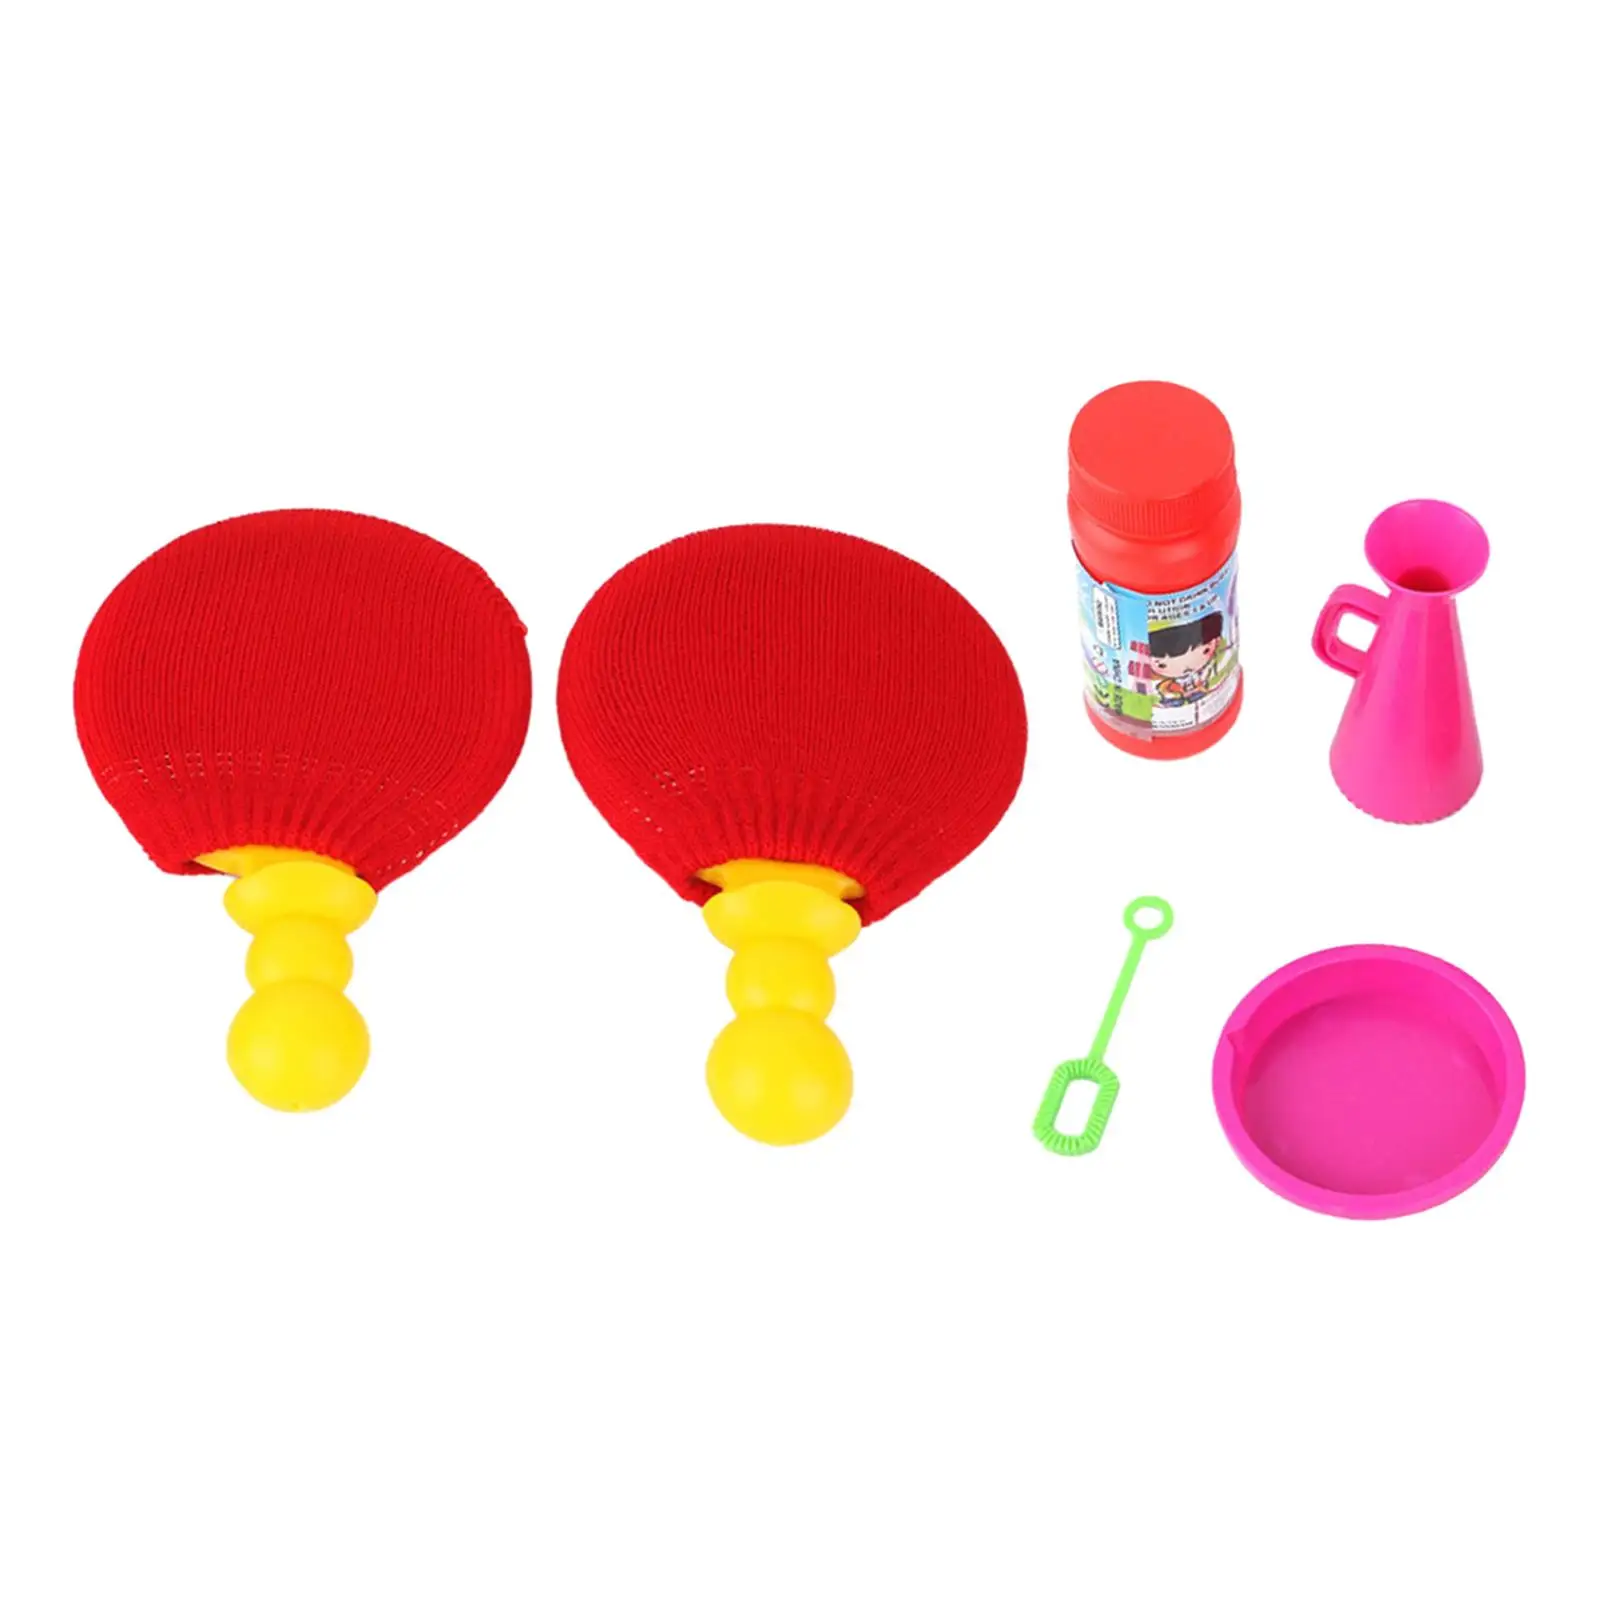 Touchable Bouncing Bubble Kits Ping Pong Game with Soap Bubble for Toddlers